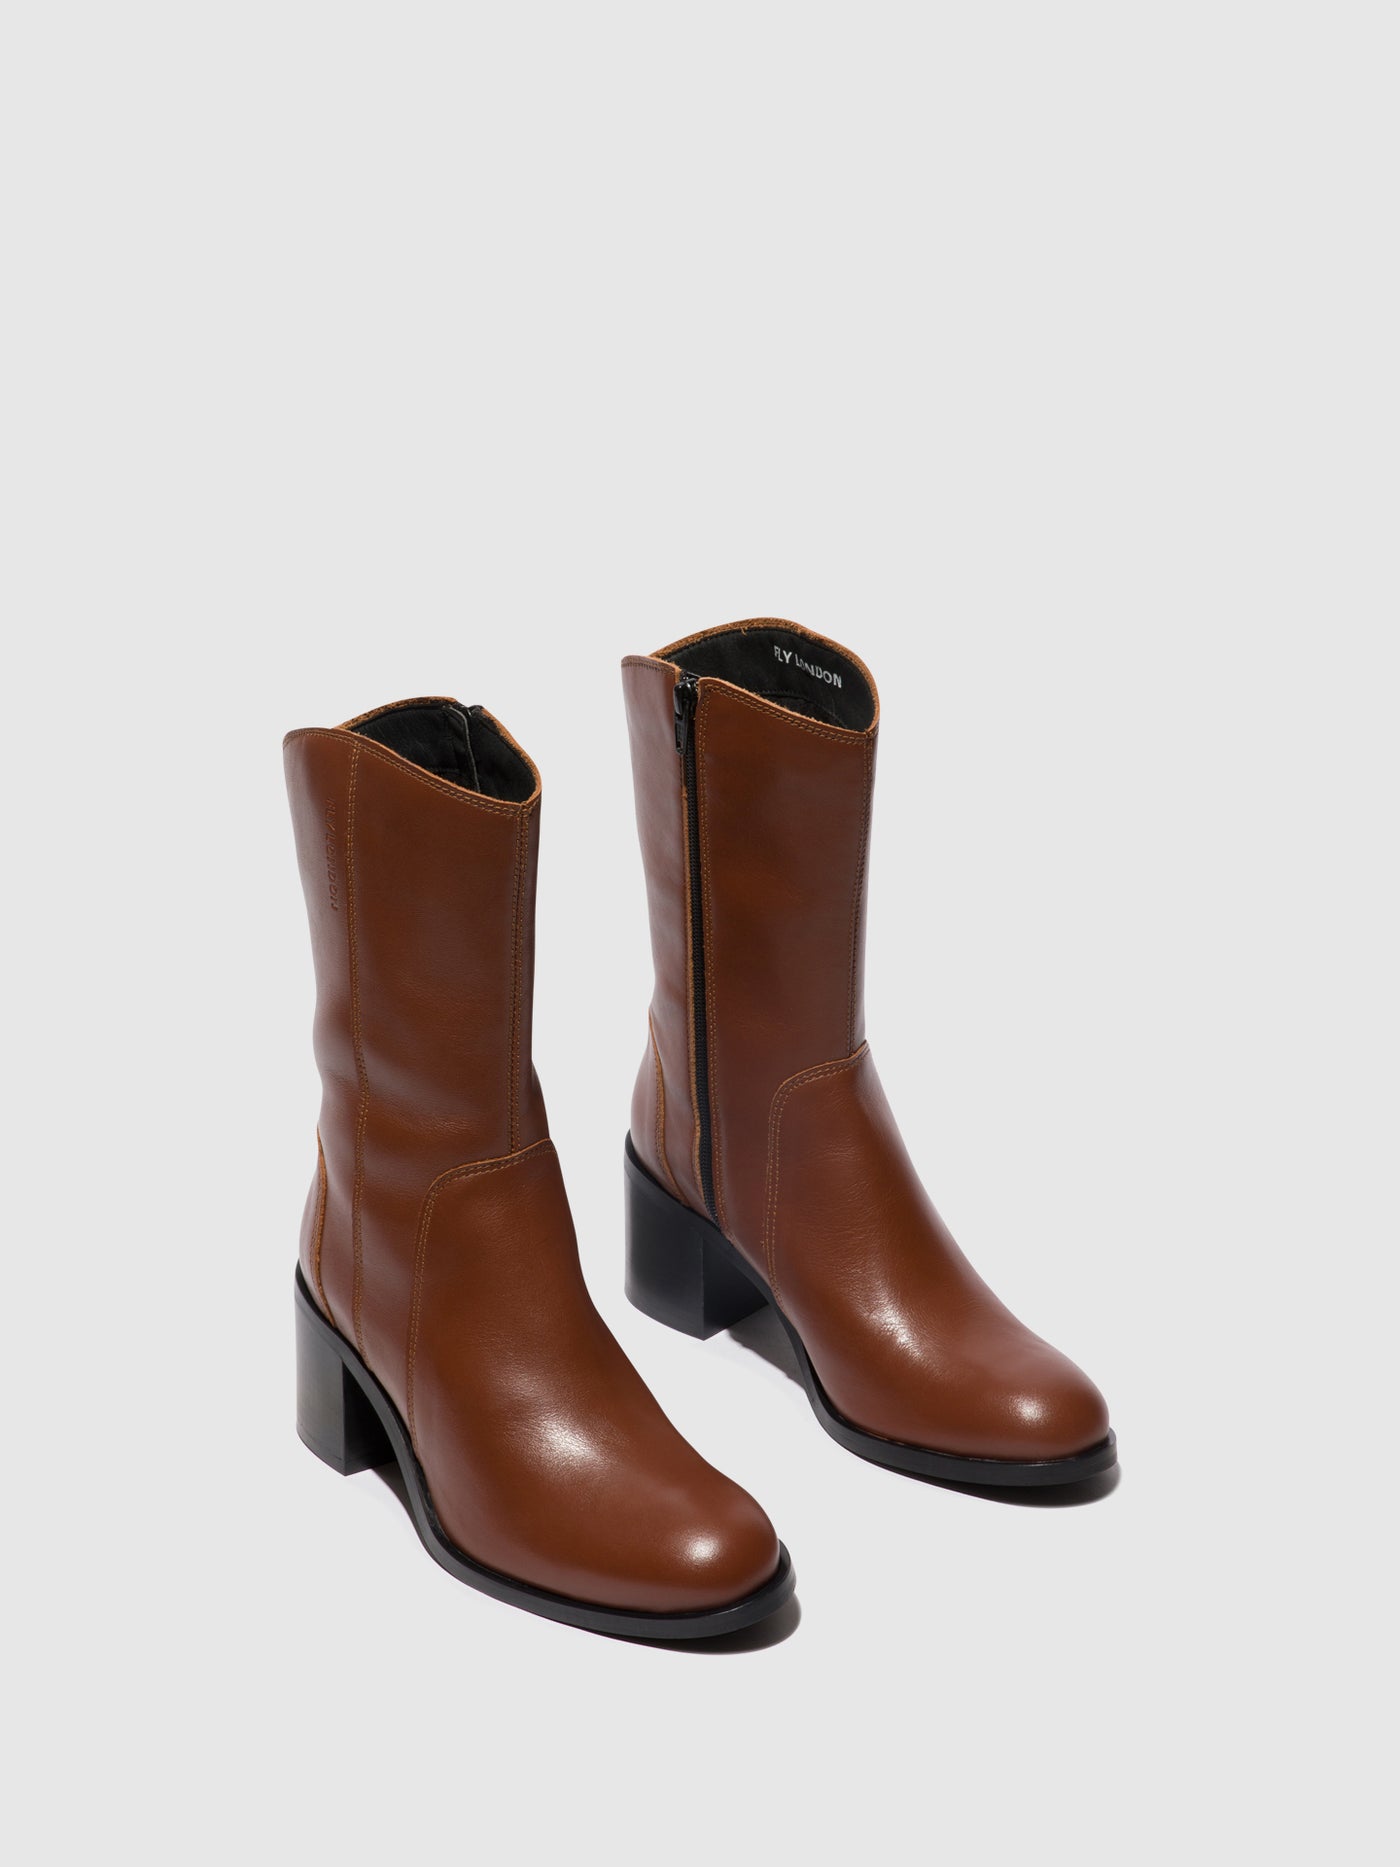 Zip Up Ankle Boots ASTA914FLY COGNAC